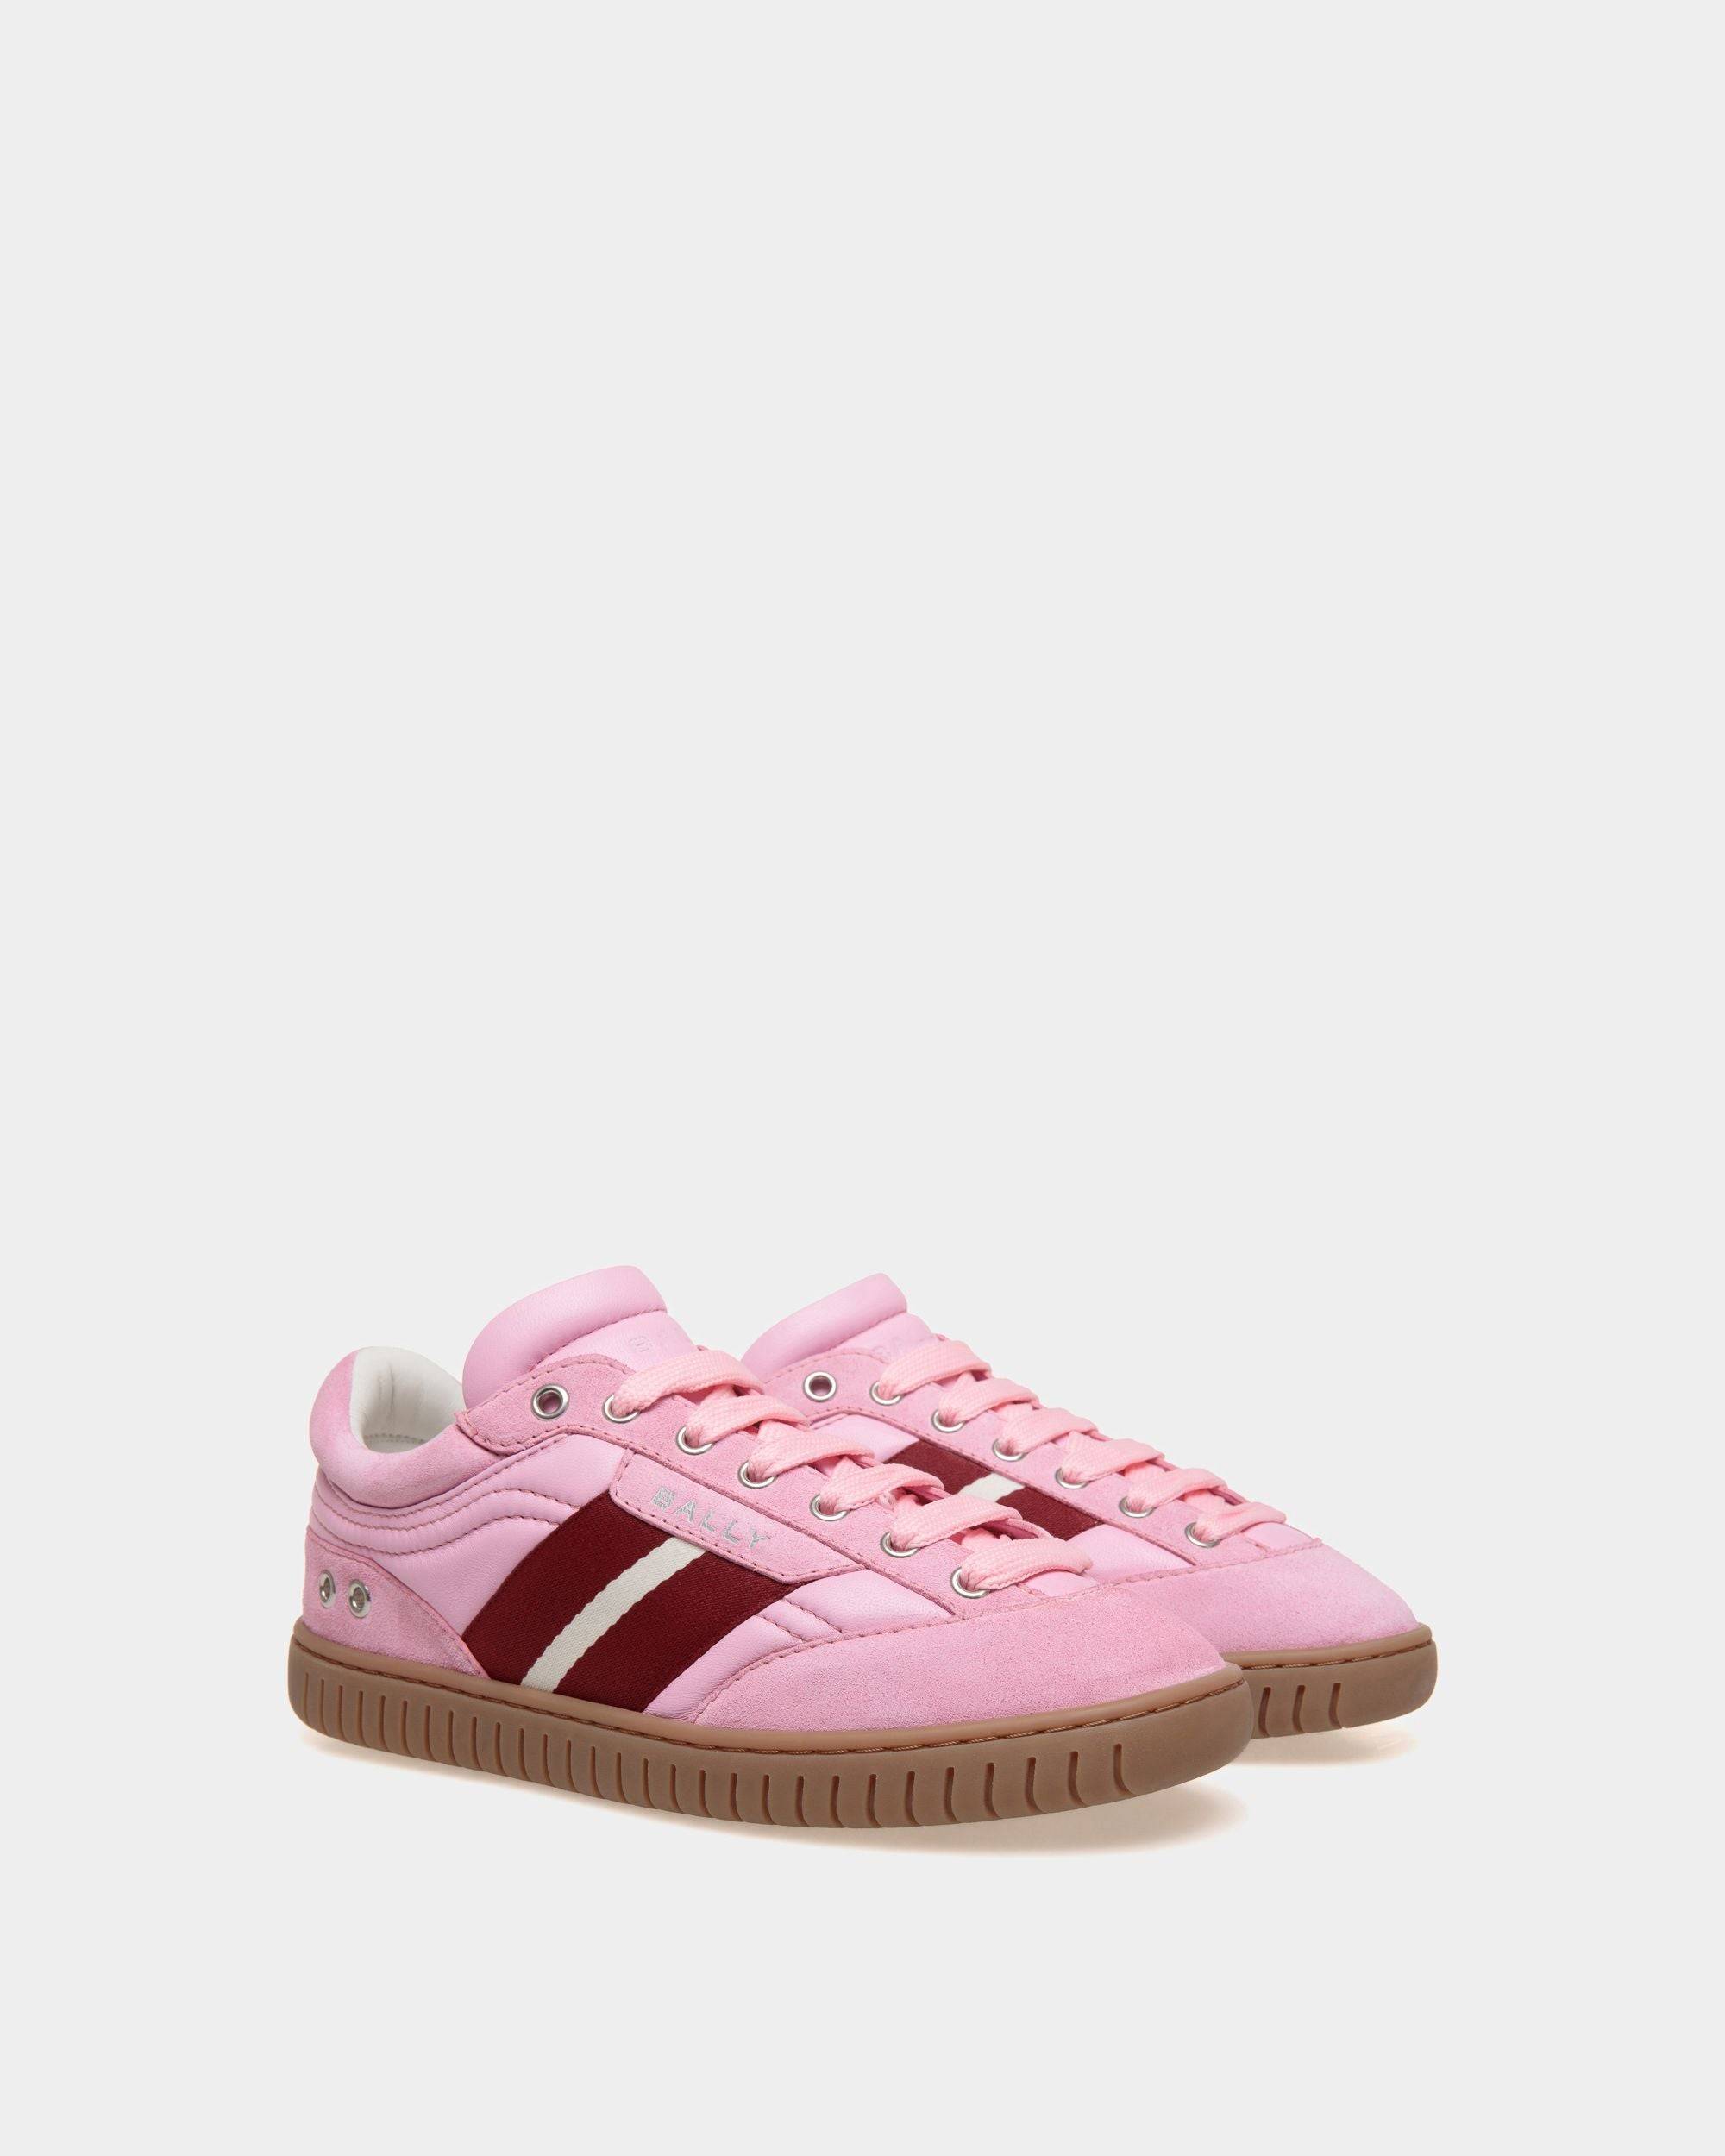 Player | Women's Sneaker in Pink Leather and Suede | Bally | Still Life 3/4 Front